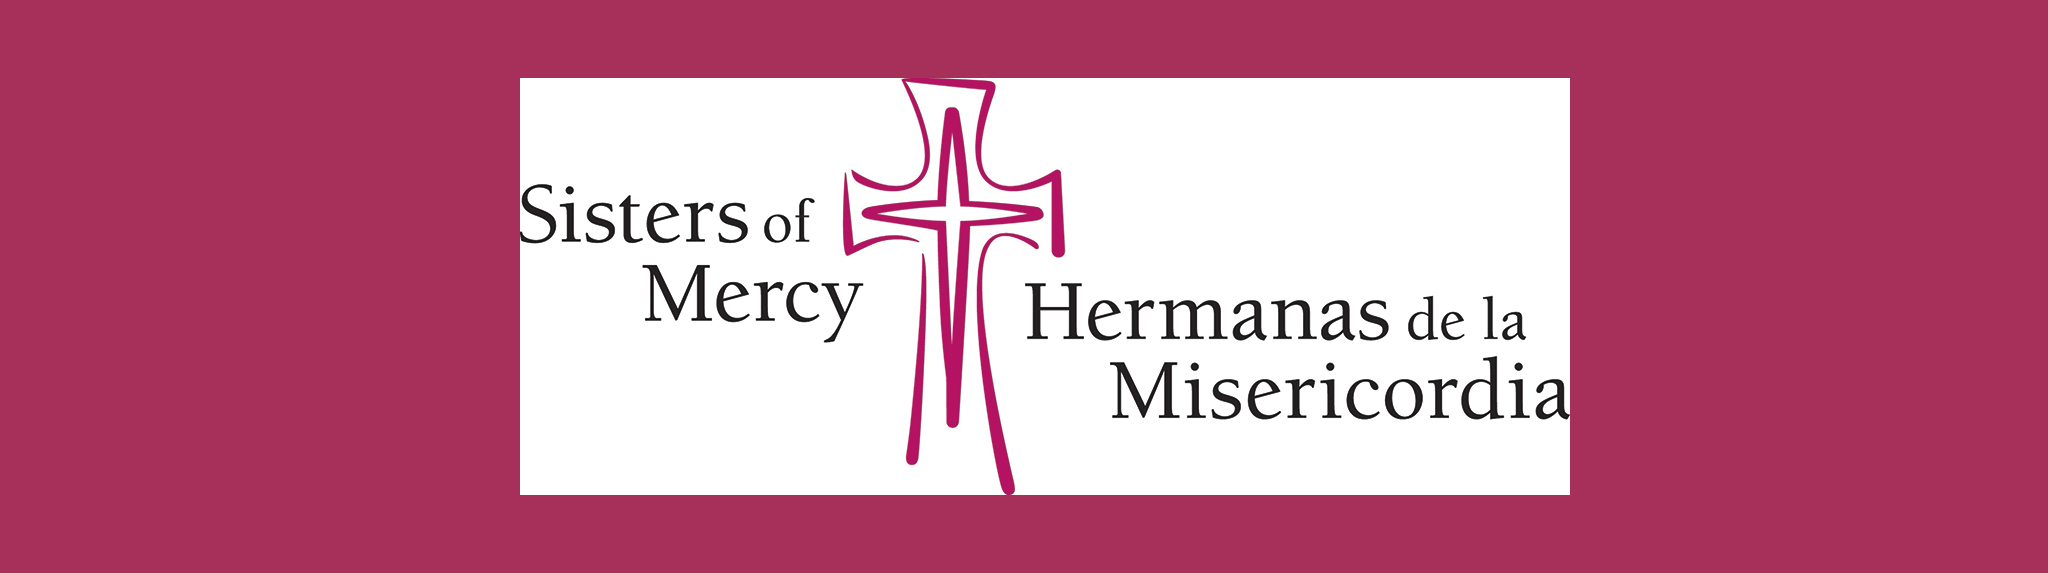 Sisters of Mercy logo banner